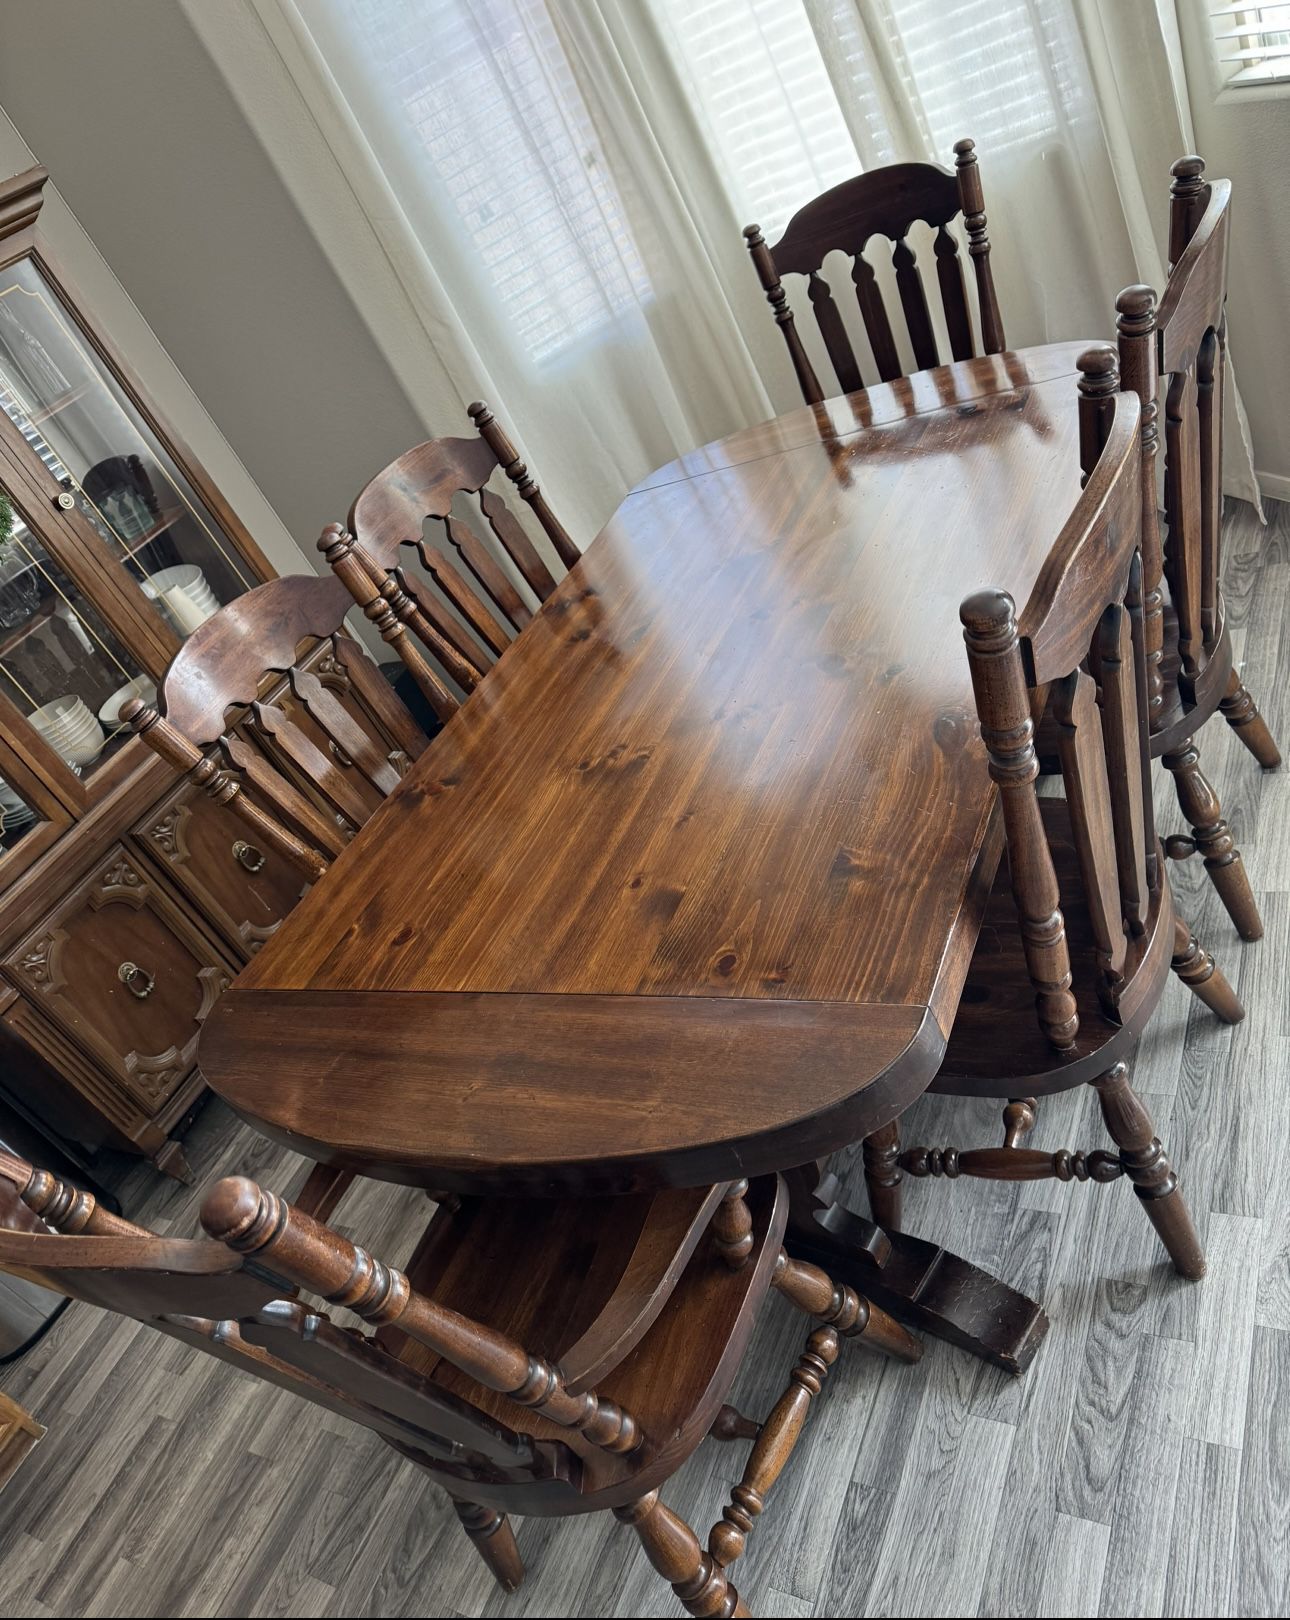 Antique Dining Table And Chairs Set Solid Wood (Willing To Negotiate Price)